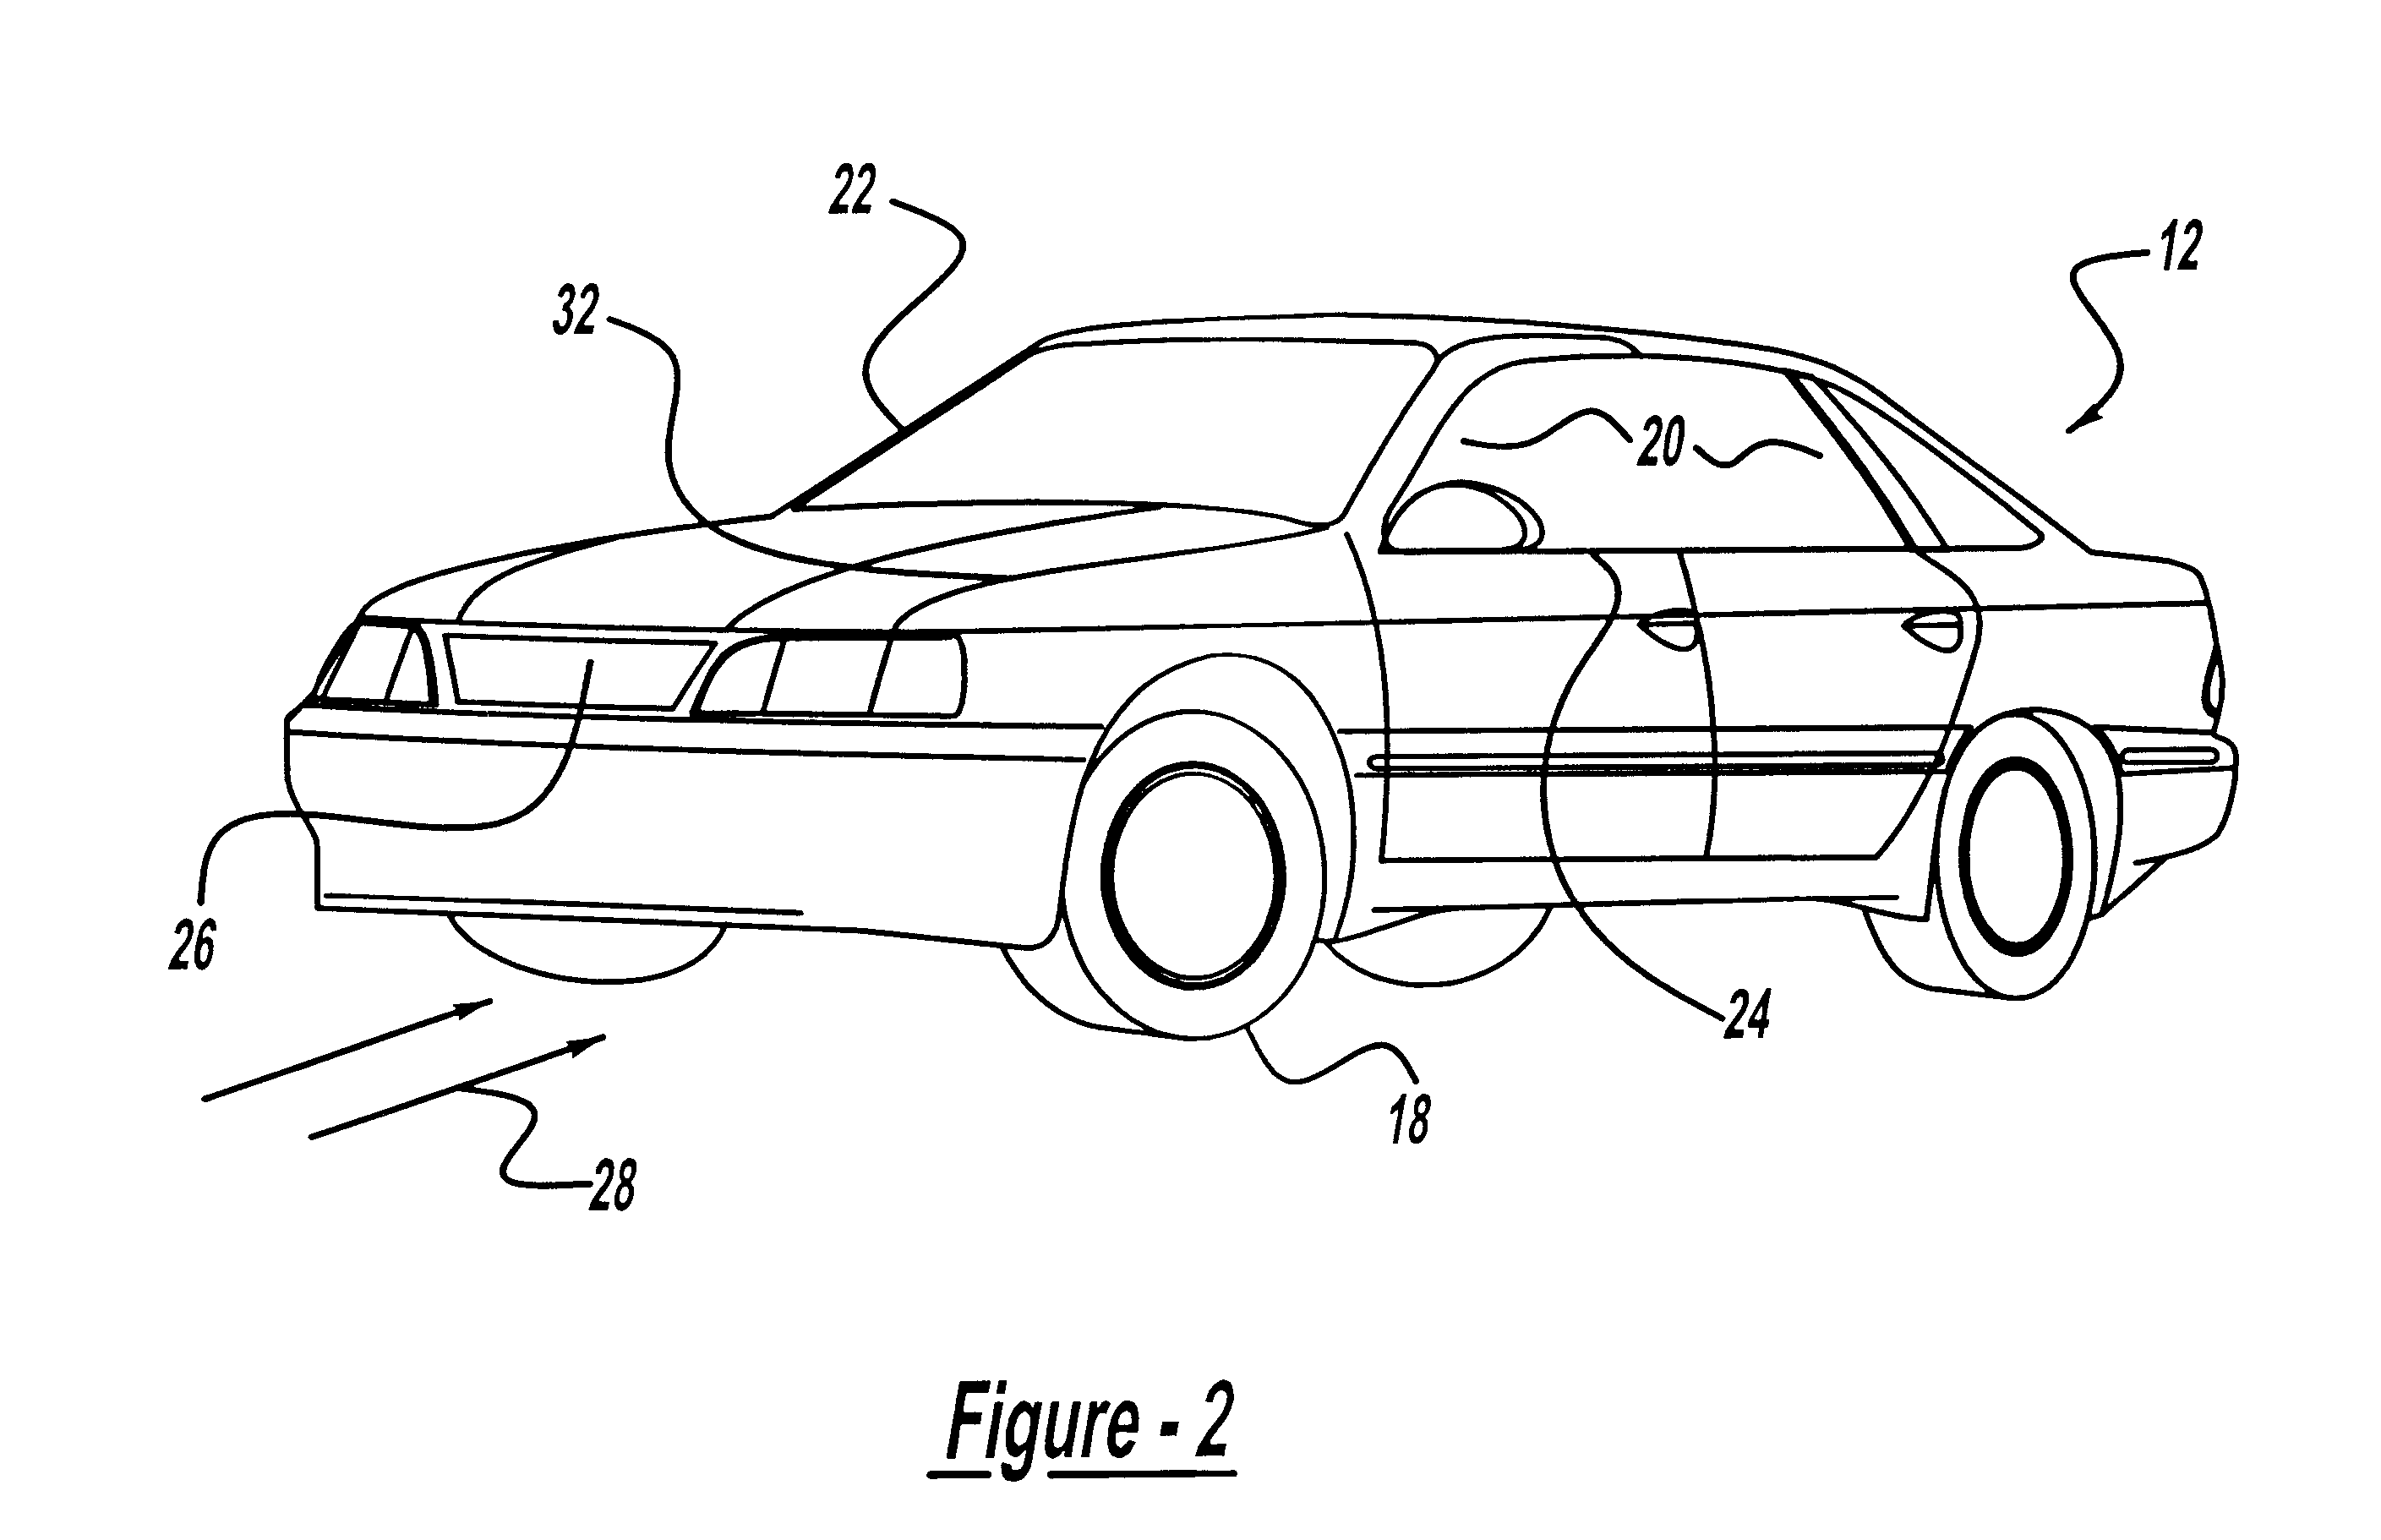 Method of thermal management for a hybrid vehicle